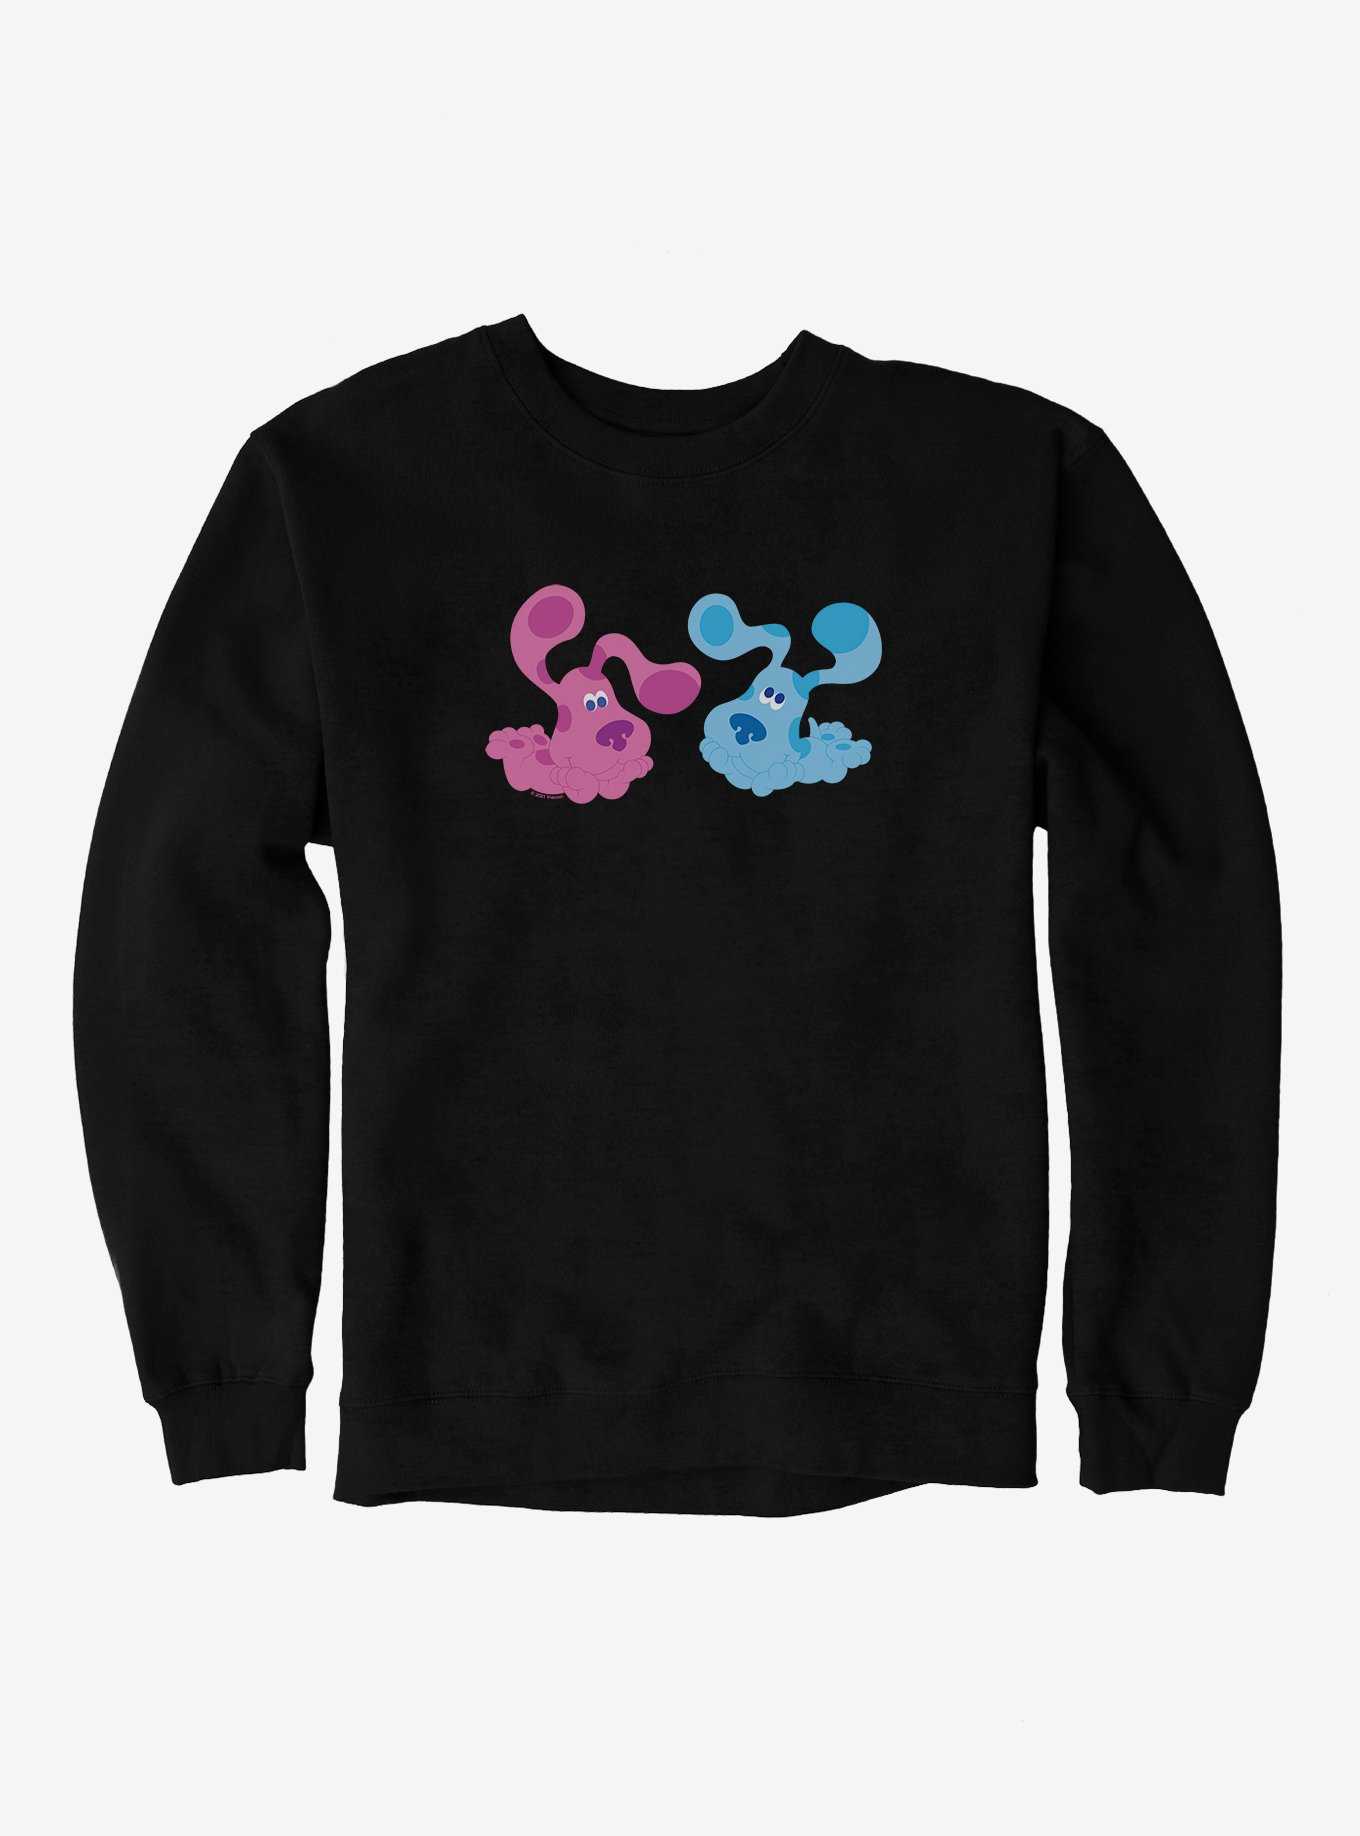 OFFICIAL Blue's Clues Shirts, Plushes & Hoodies